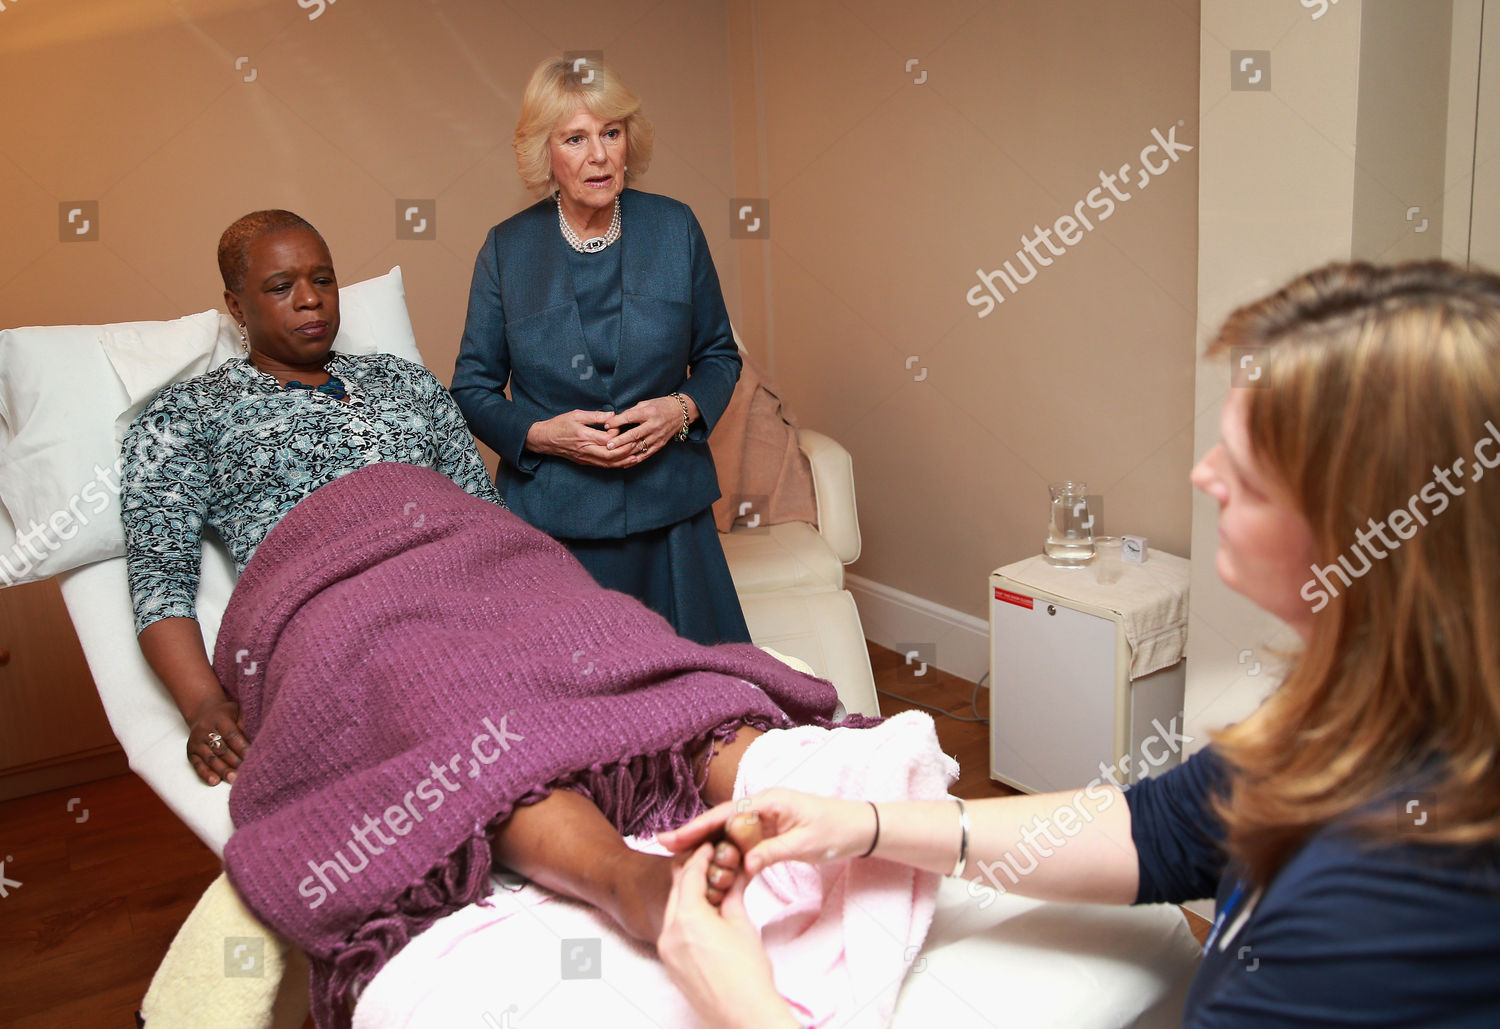 the-duchess-of-cornwall-visits-the-royal-trinity-hospice-london-britain-shutterstock-editorial-5585541j.jpg